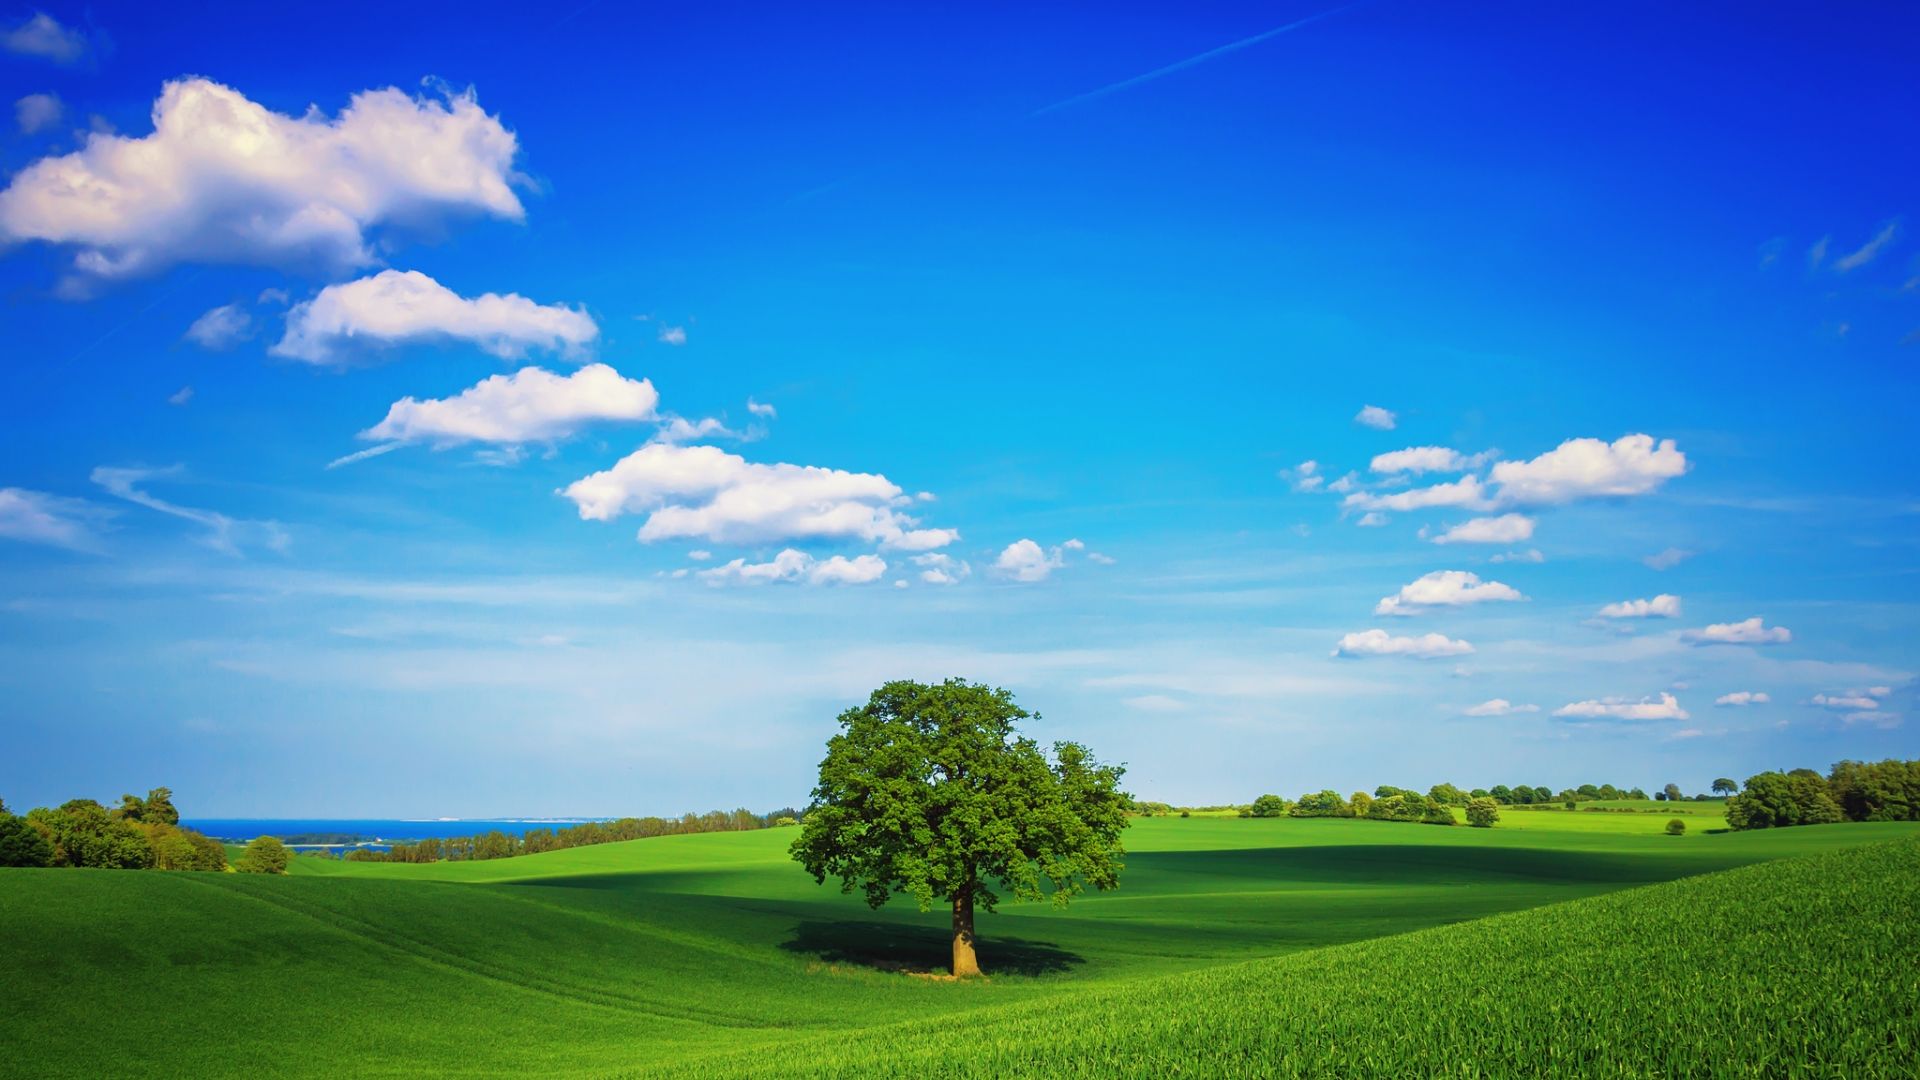 Desktop Wallpaper Tree Field Plain Green Sky Lonely Day Summer, Hd Image,  Picture, Background, Pagcwz